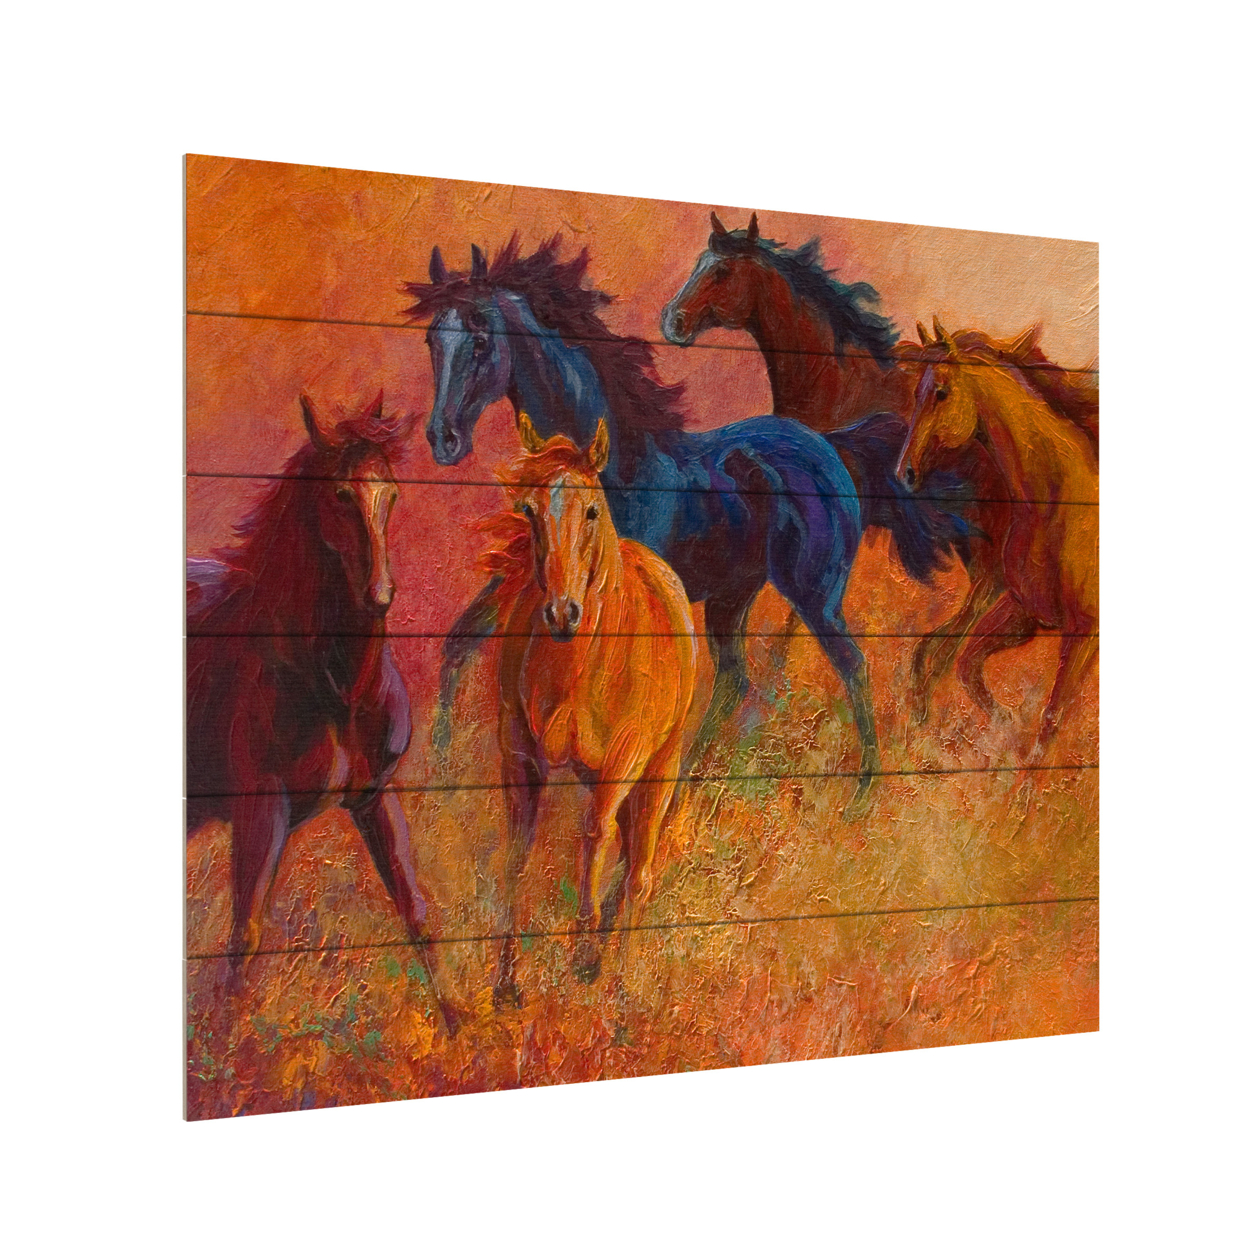 Wooden Slat Art 18 X 22 Inches Titled Free Range Horses Ready To Hang Home Decor Picture